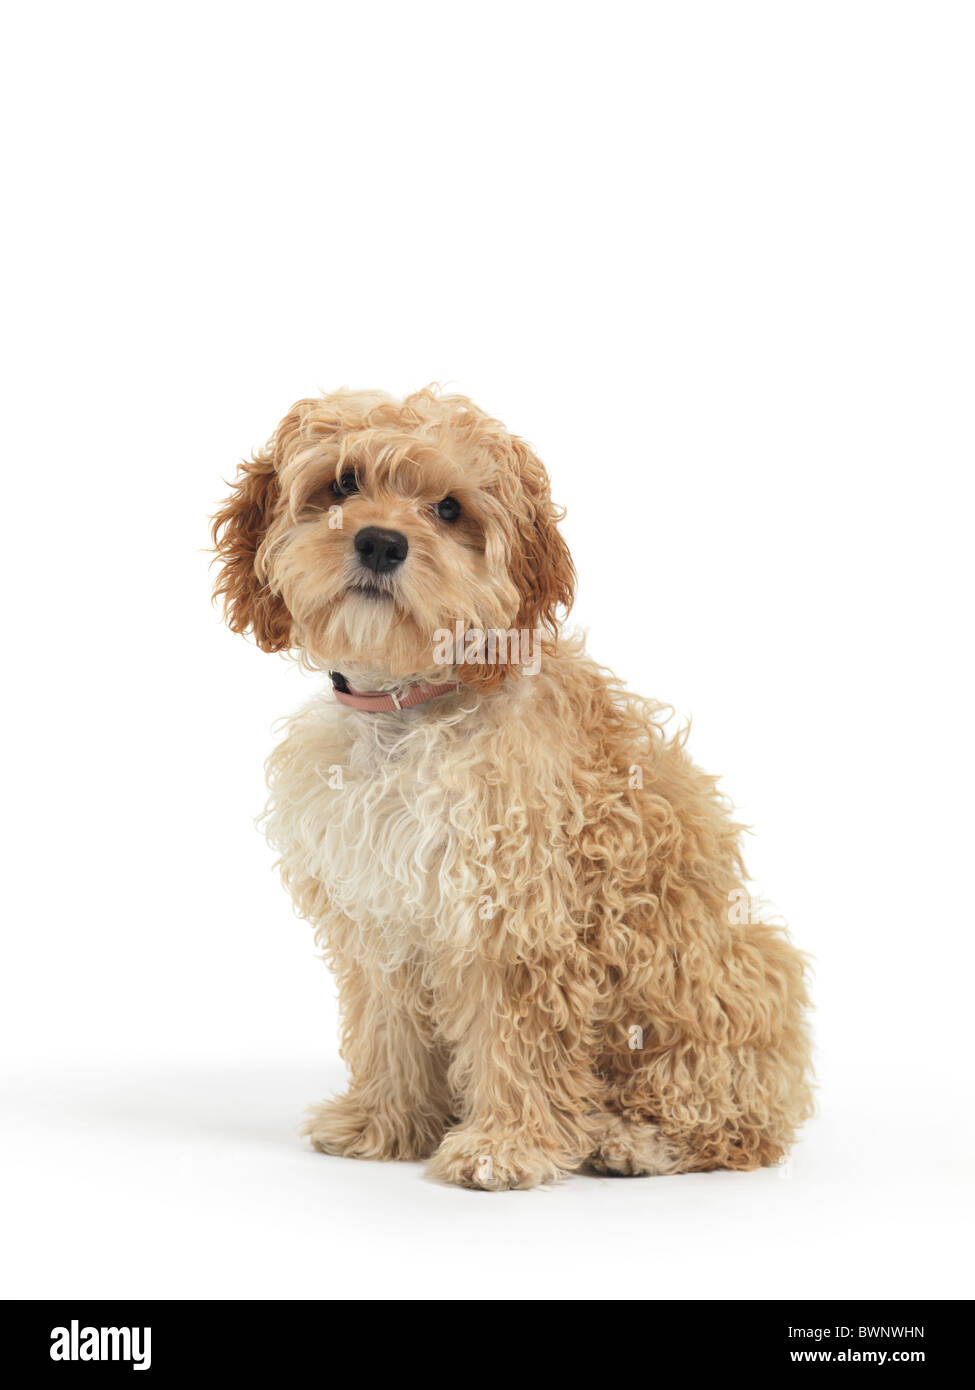 License available at MaximImages.com - Cockapoo cute cross breed dog of cocker spaniel and a poodle isolated on white background Stock Photo